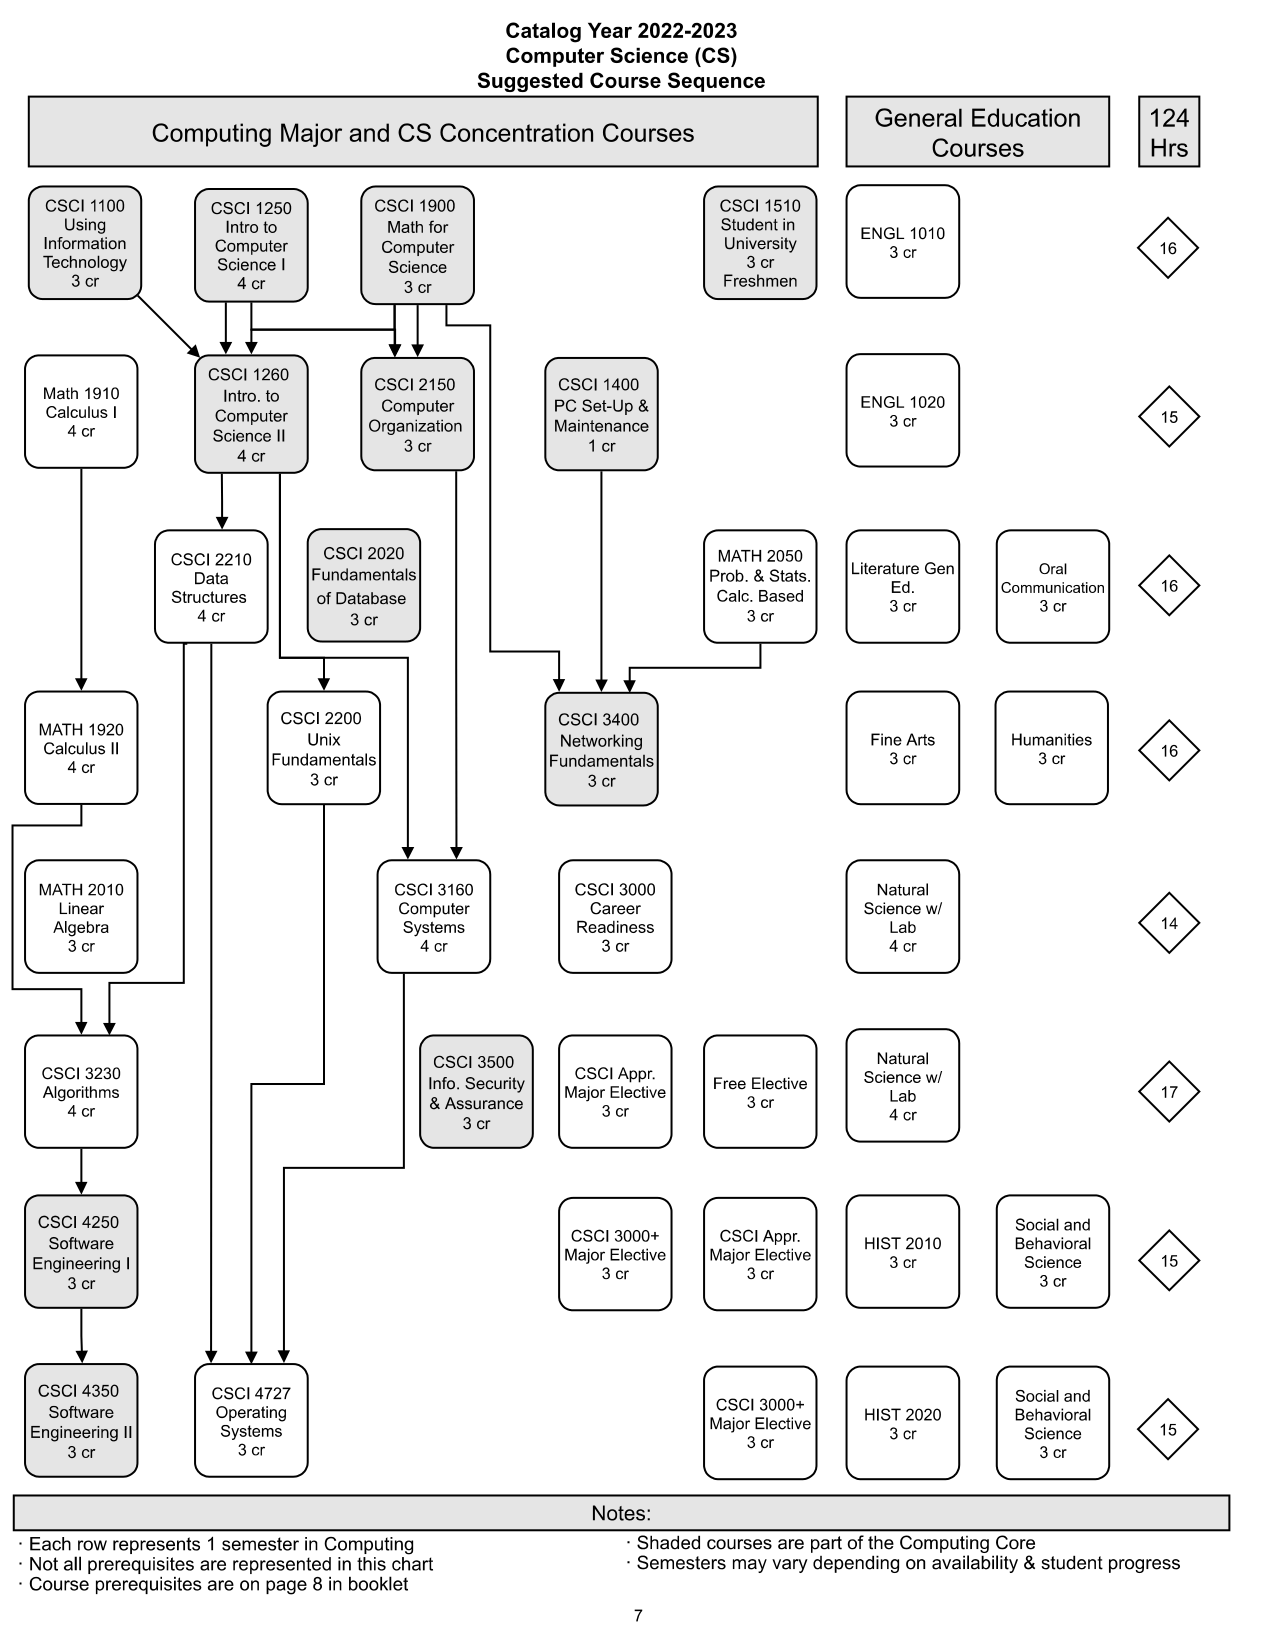 A diagram showing a suggested course path for students in the Computer Science concentration.